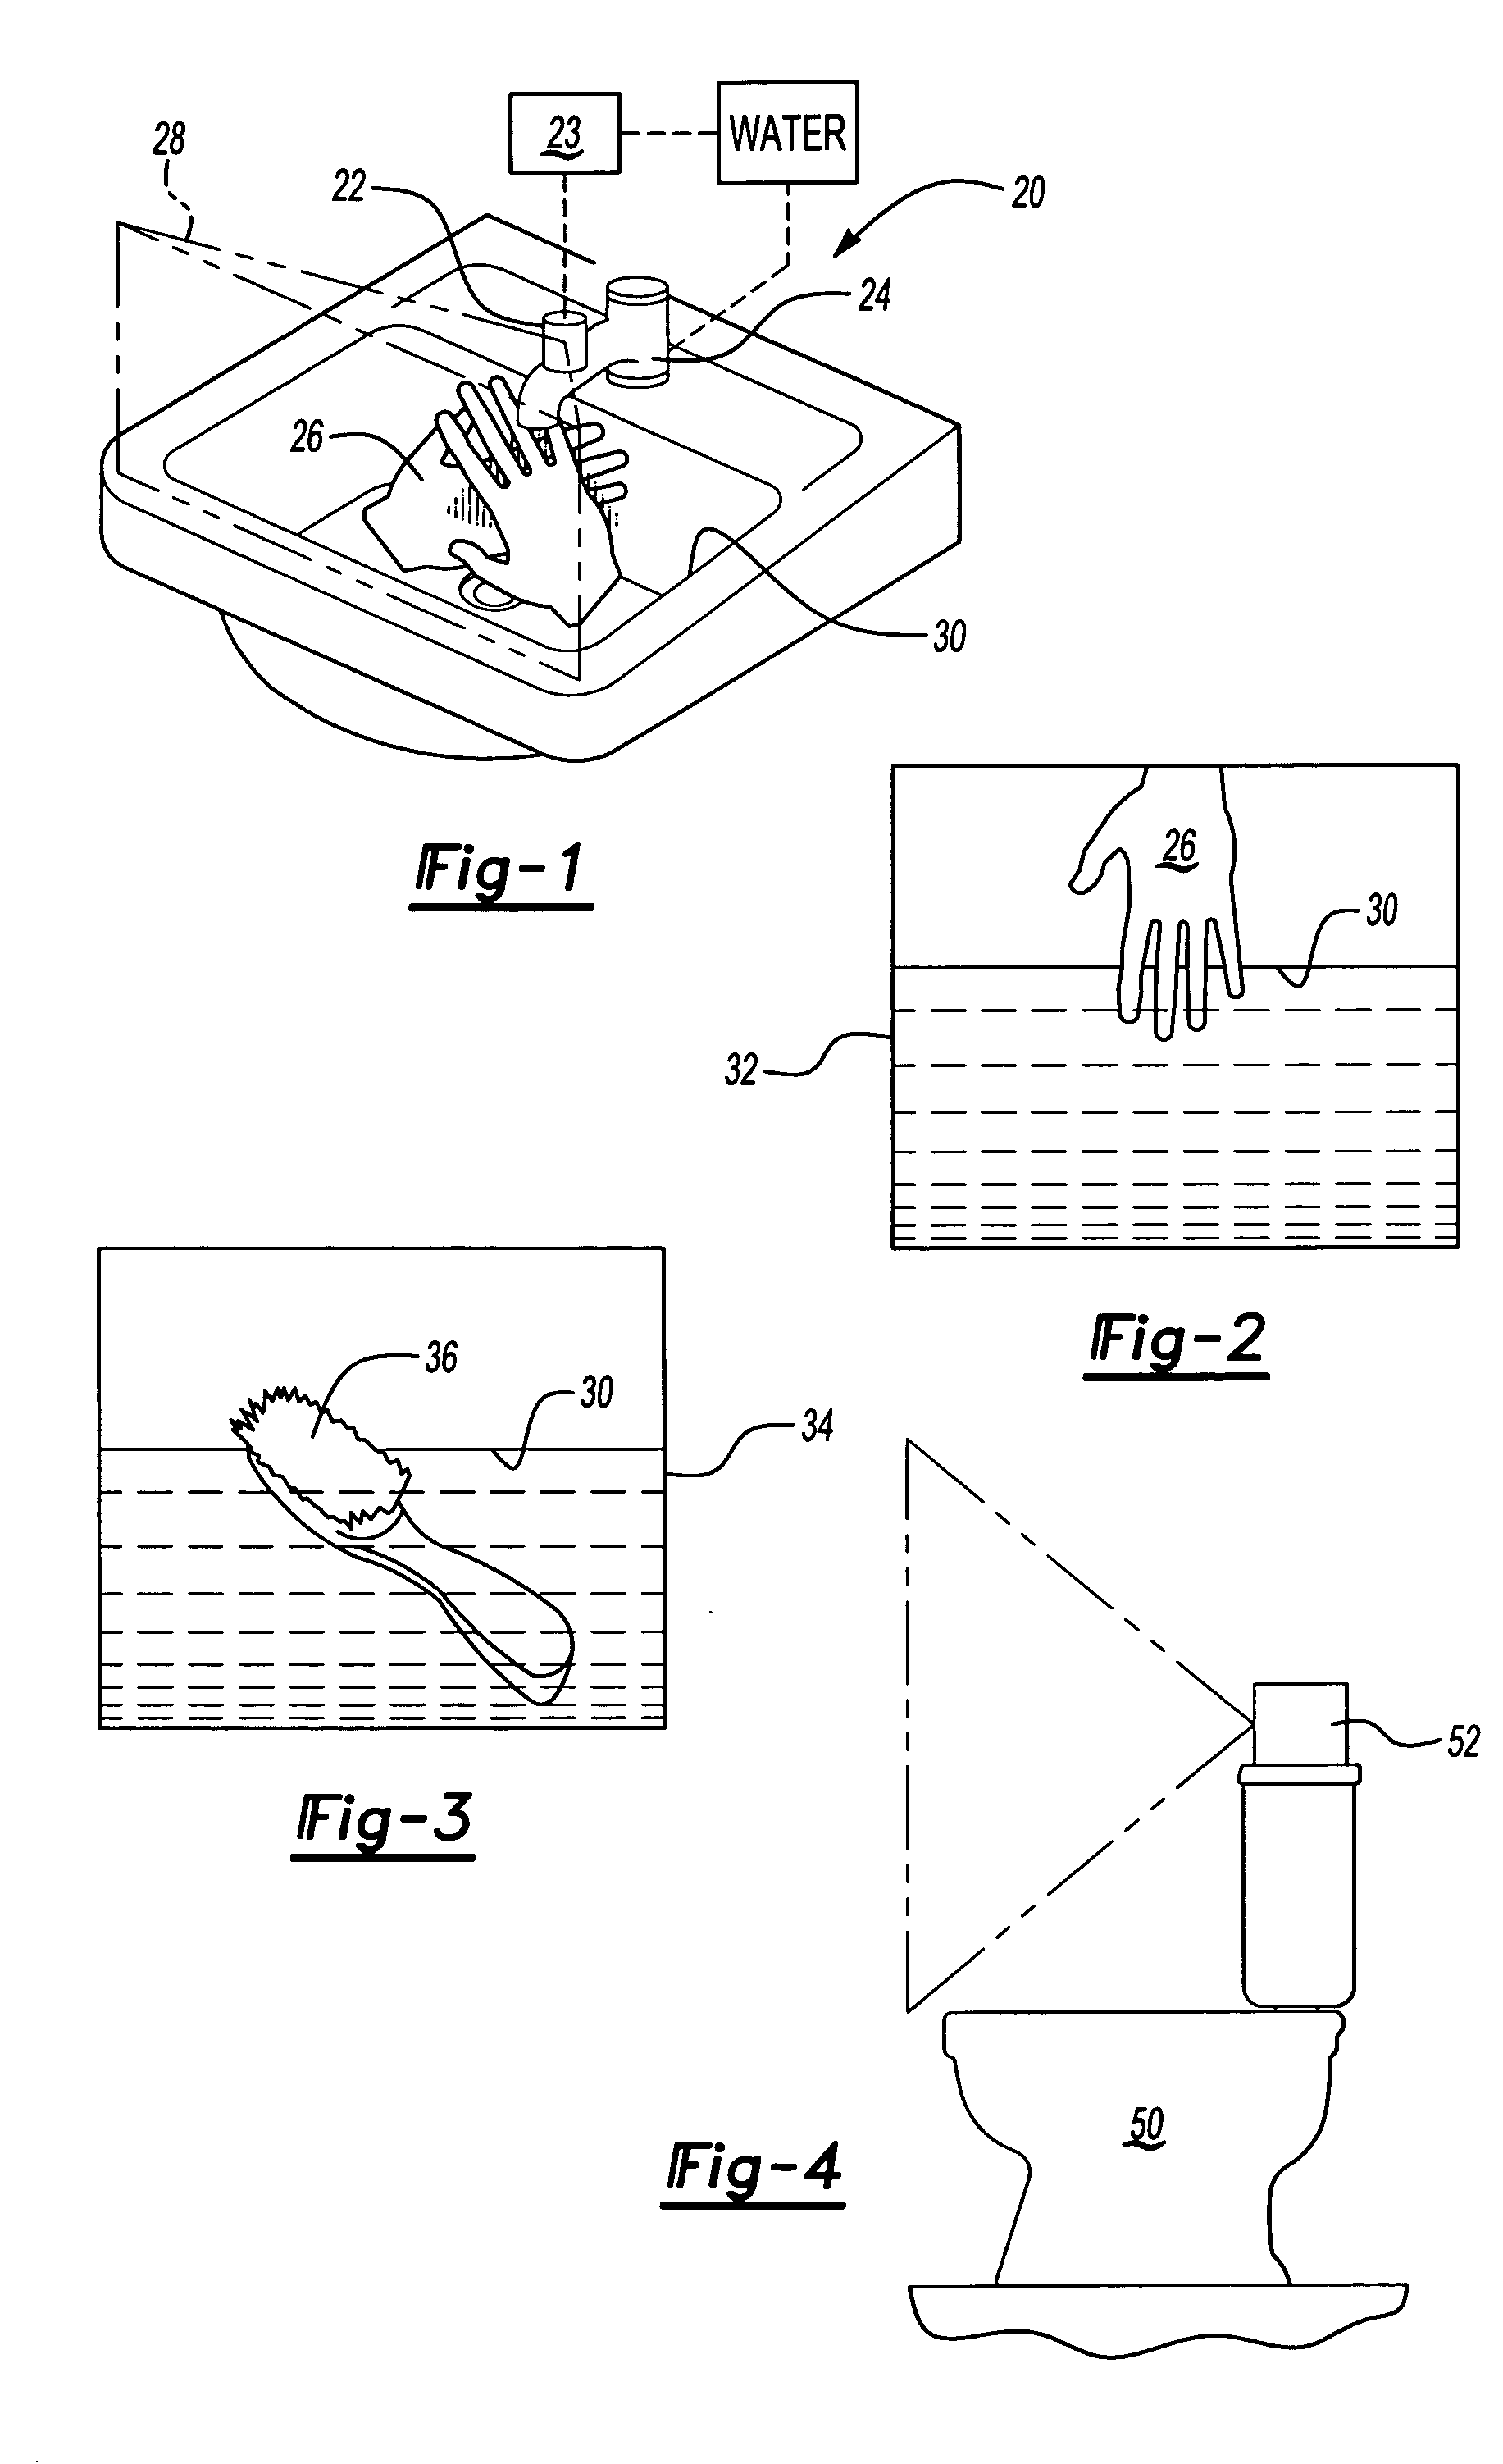 CCD camera element used as actuation detector for electric plumbing products